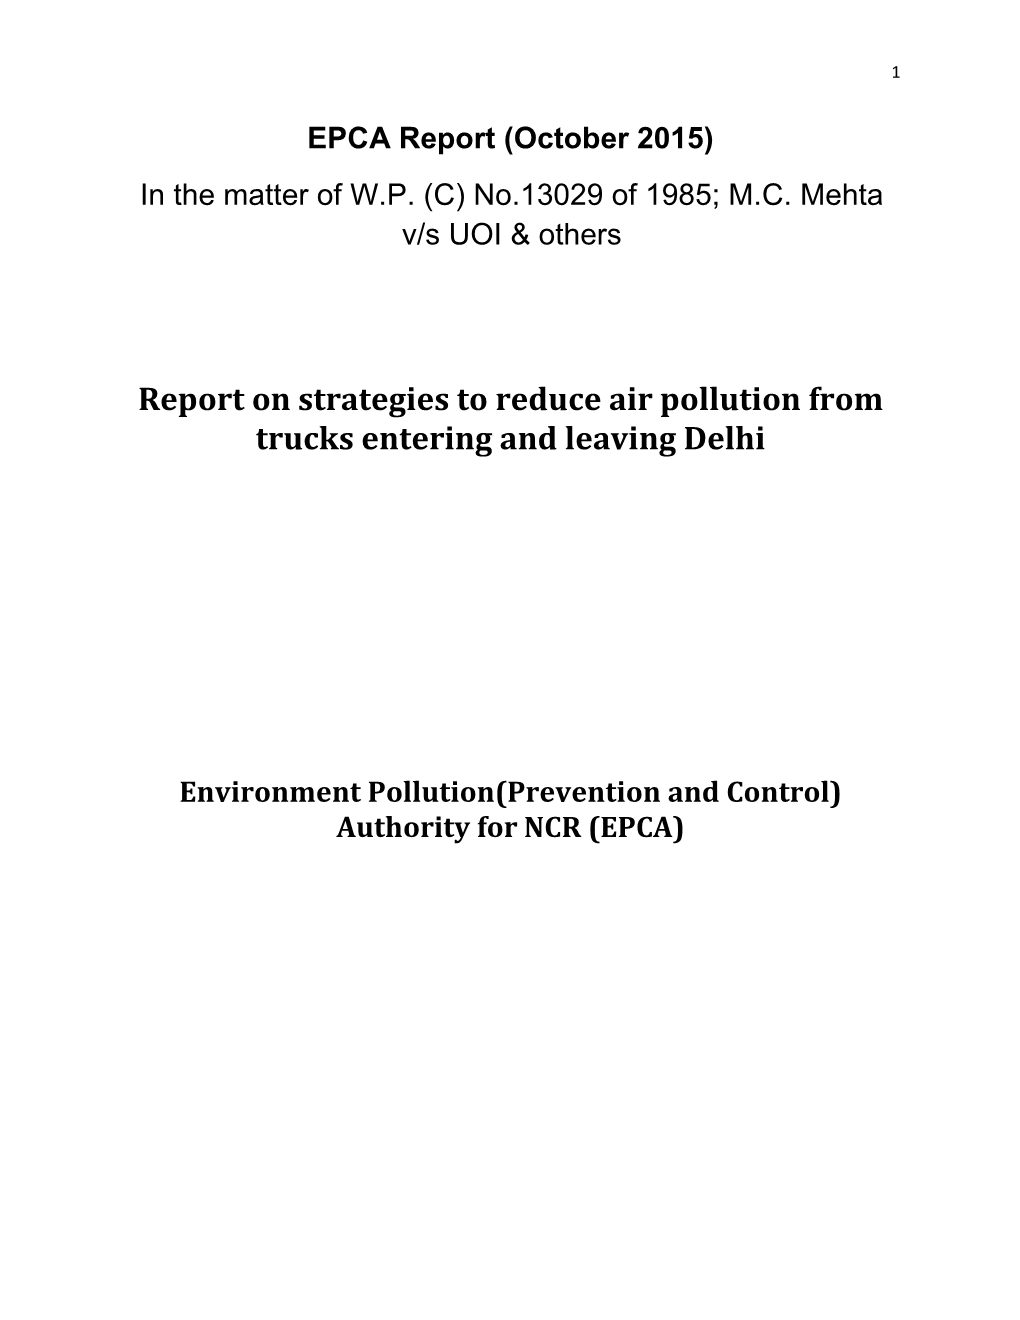 EPCA Report on Strategies to Reduce Truck Pollution in Delhi